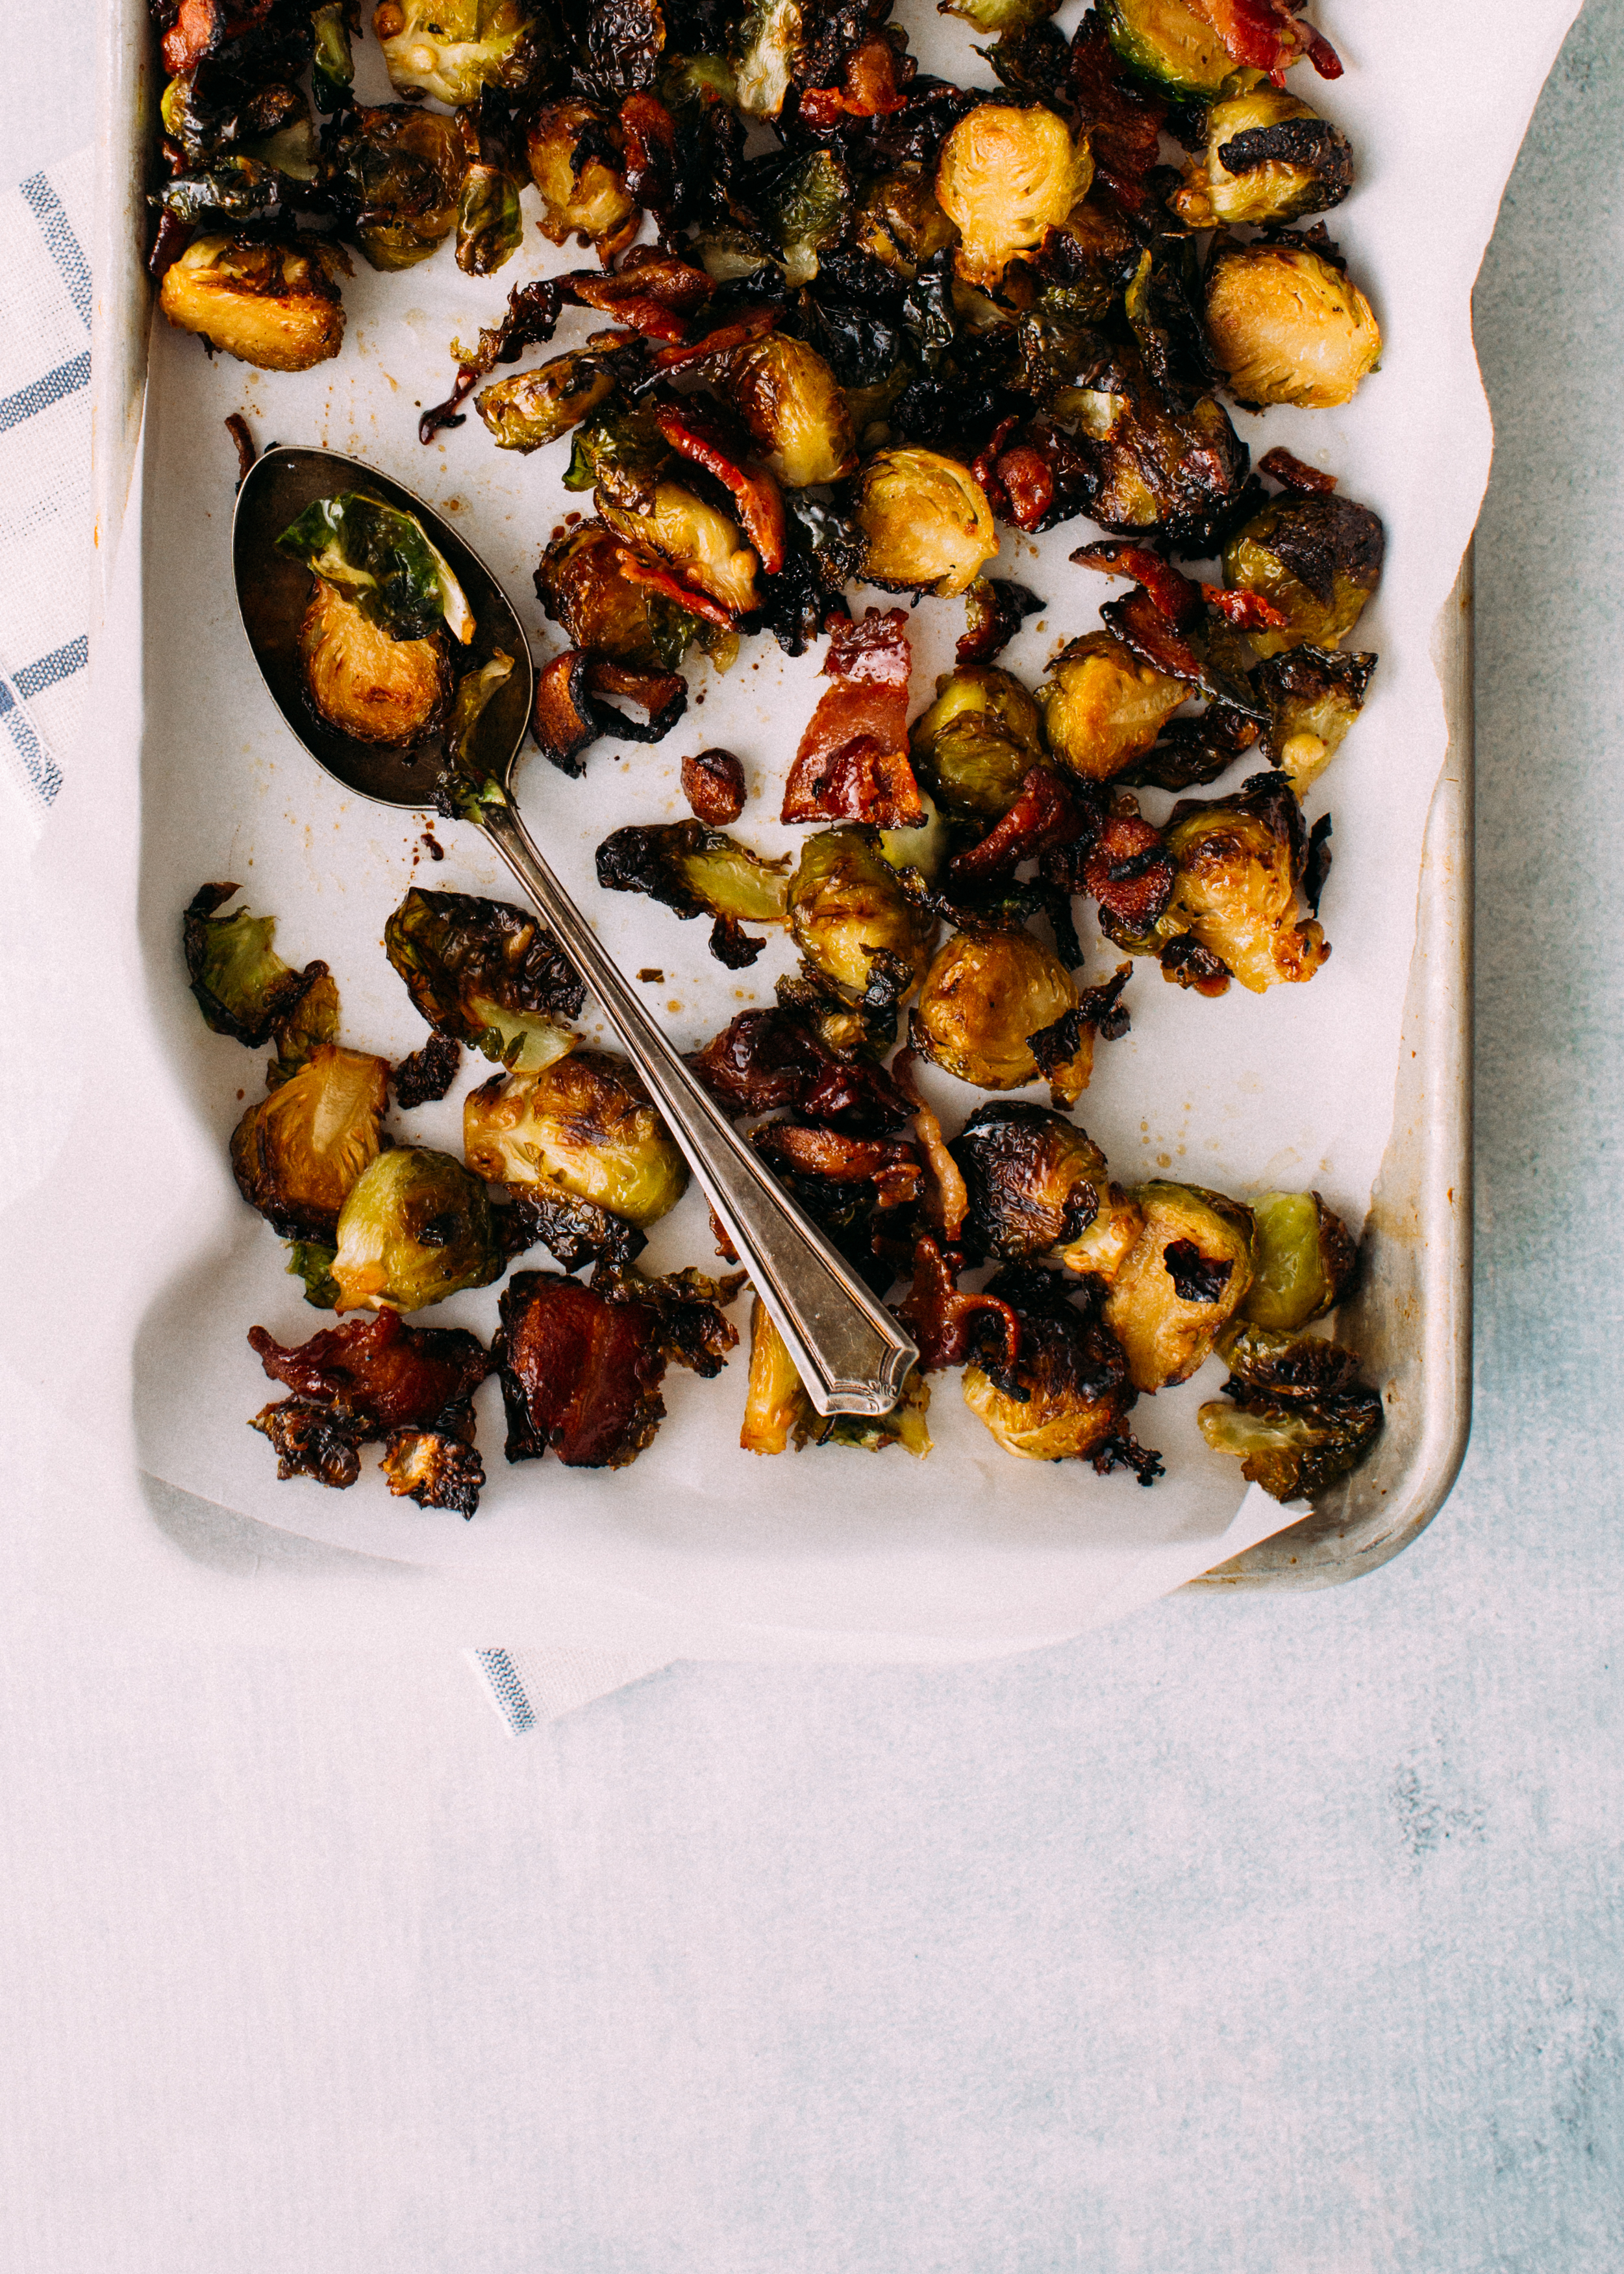 Candied Brussels Sprouts with bacon and maple syrup